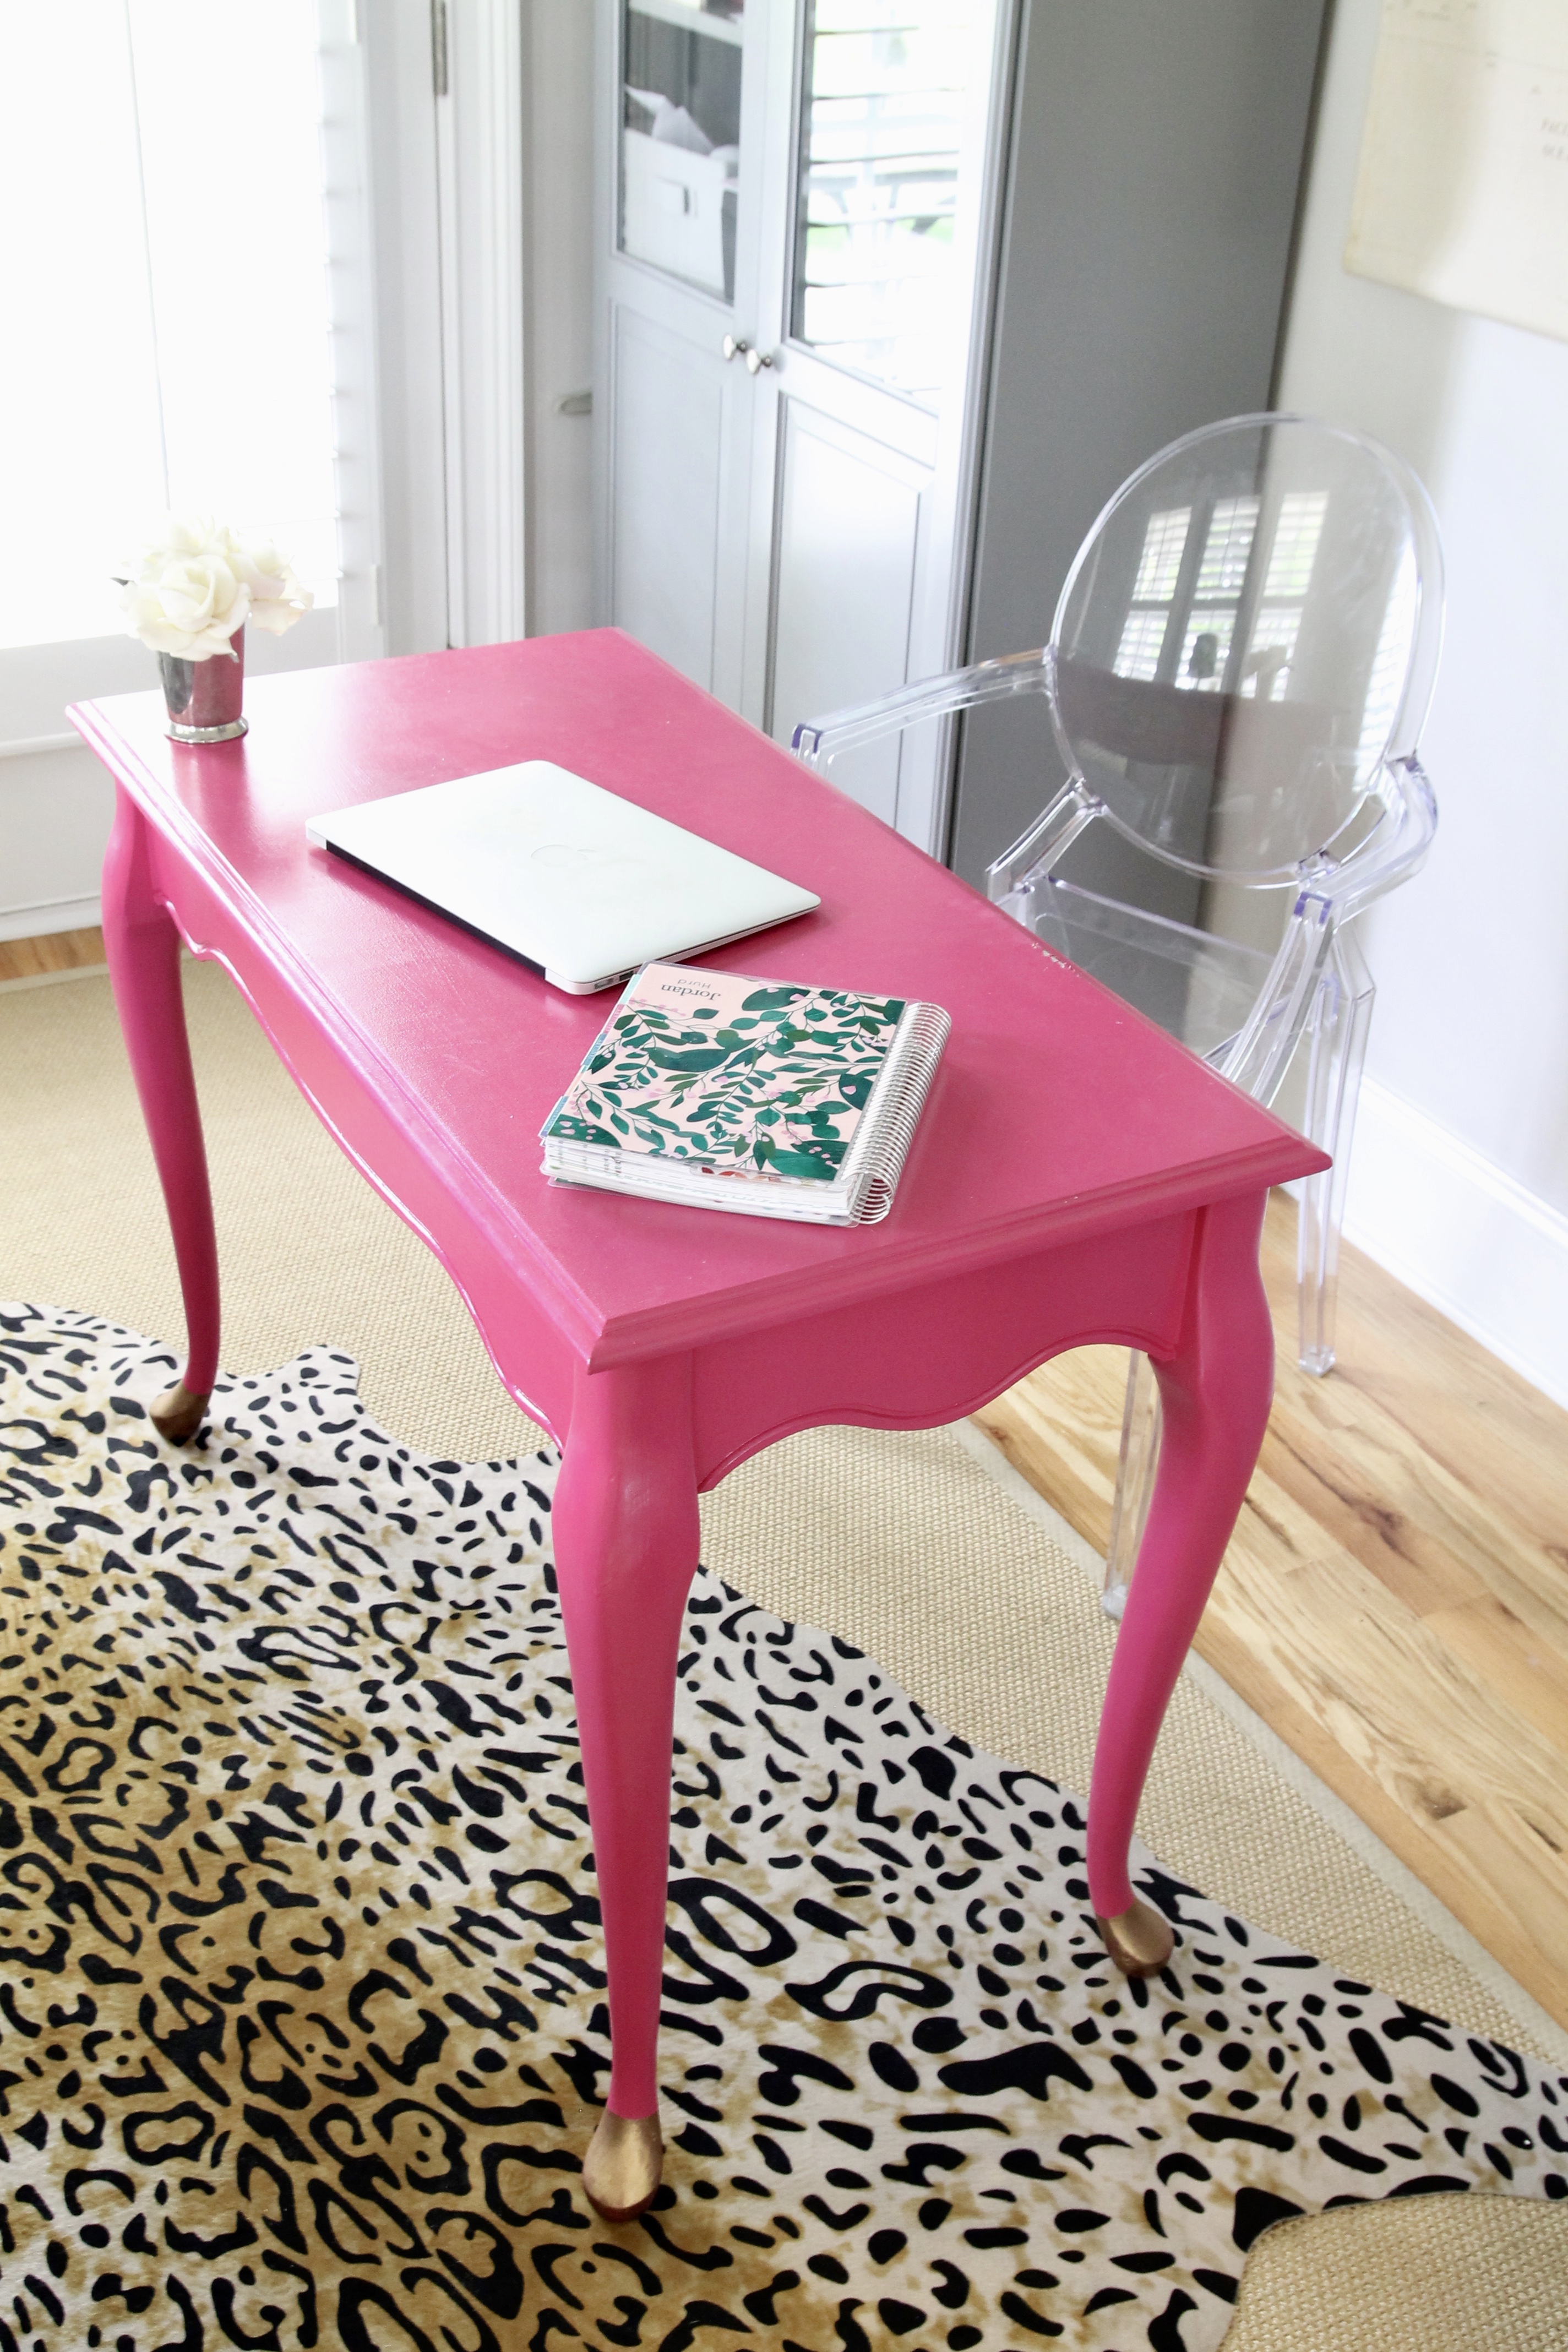 An Easy Way To Update On Old Desk Is With A Bright Bold Paint Color